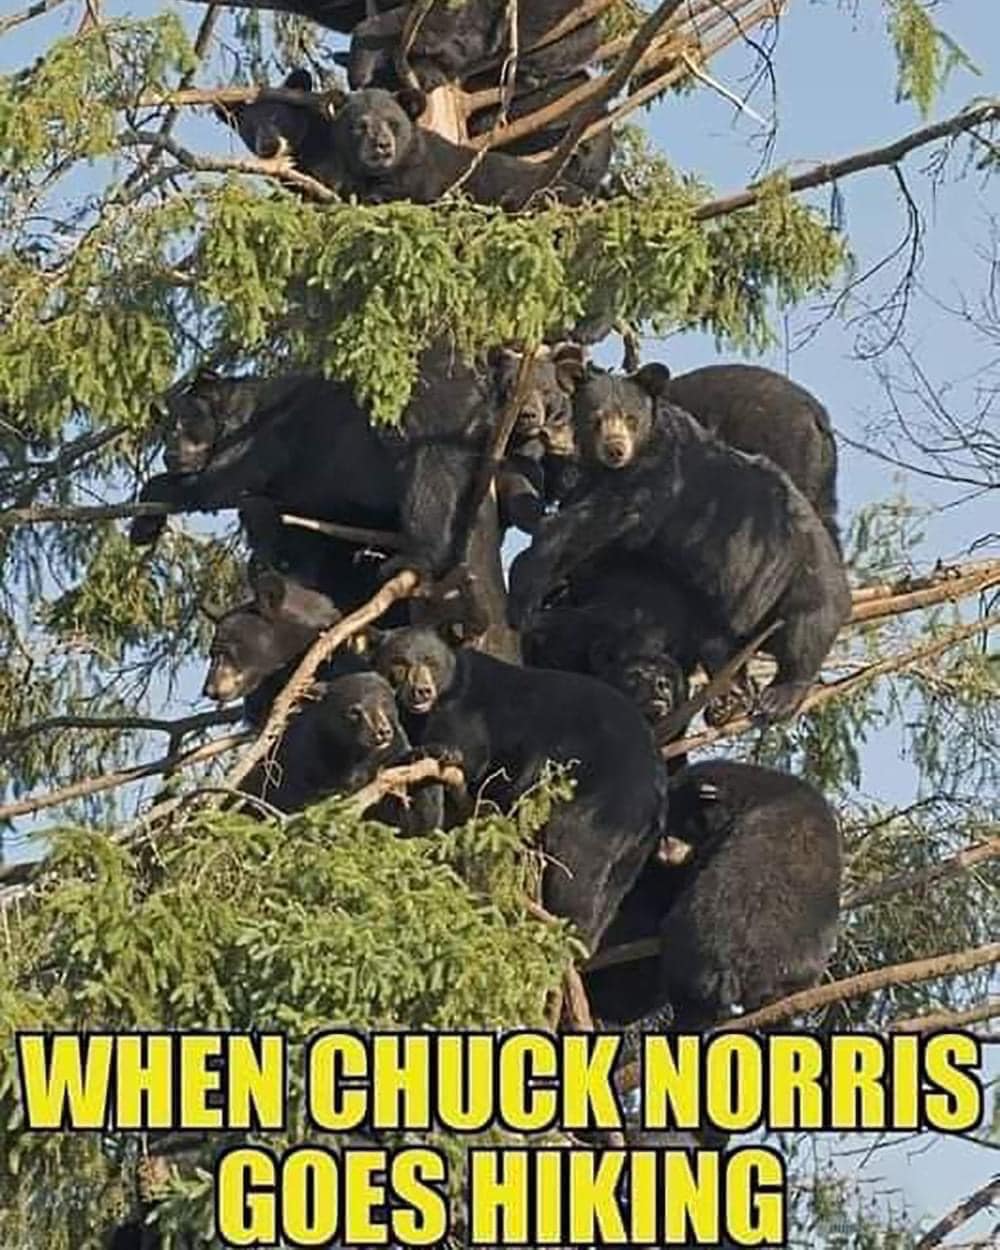 when chuck norris goes hiking, too many bears in that tree